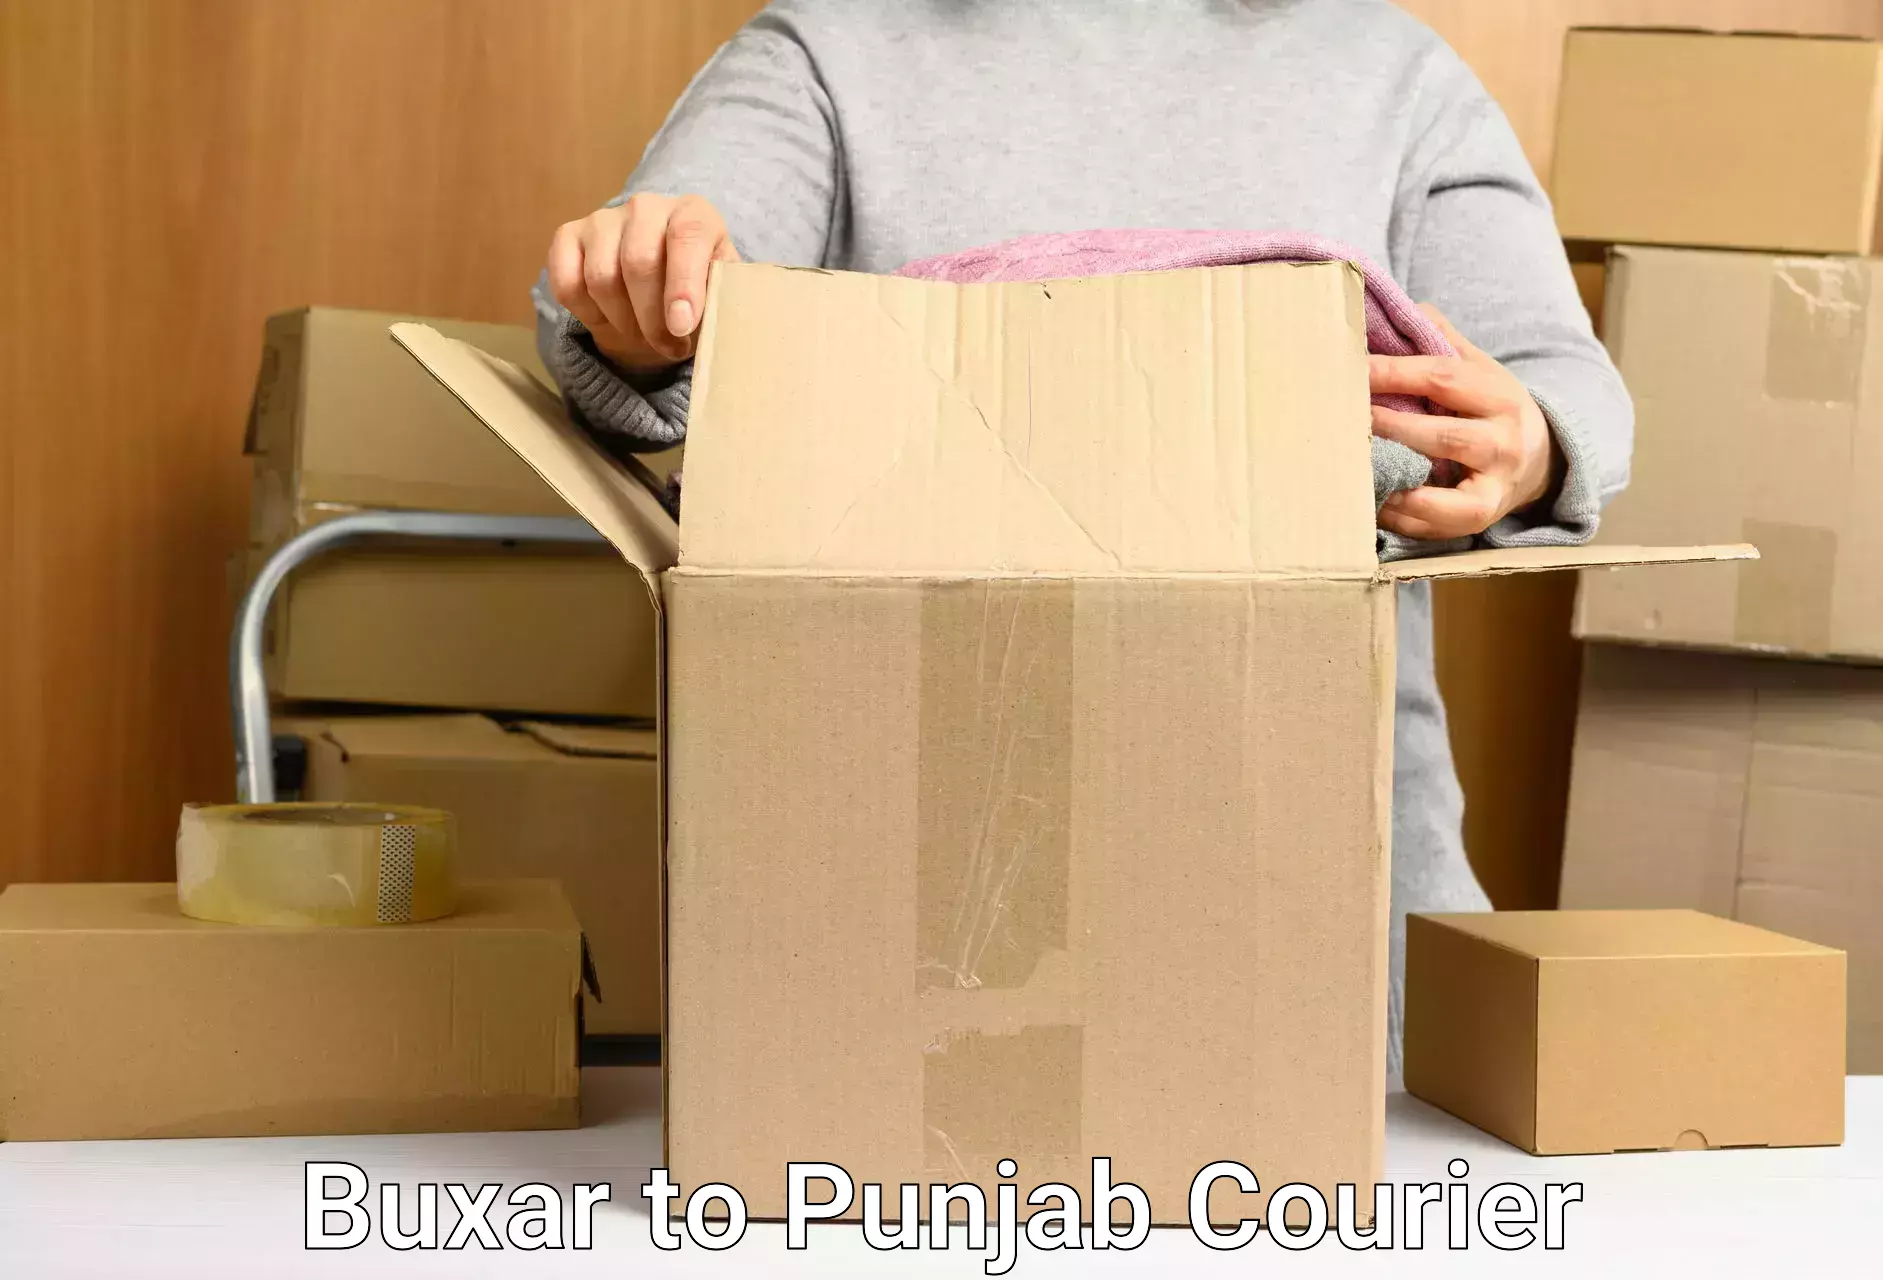 Subscription-based courier Buxar to Dhuri